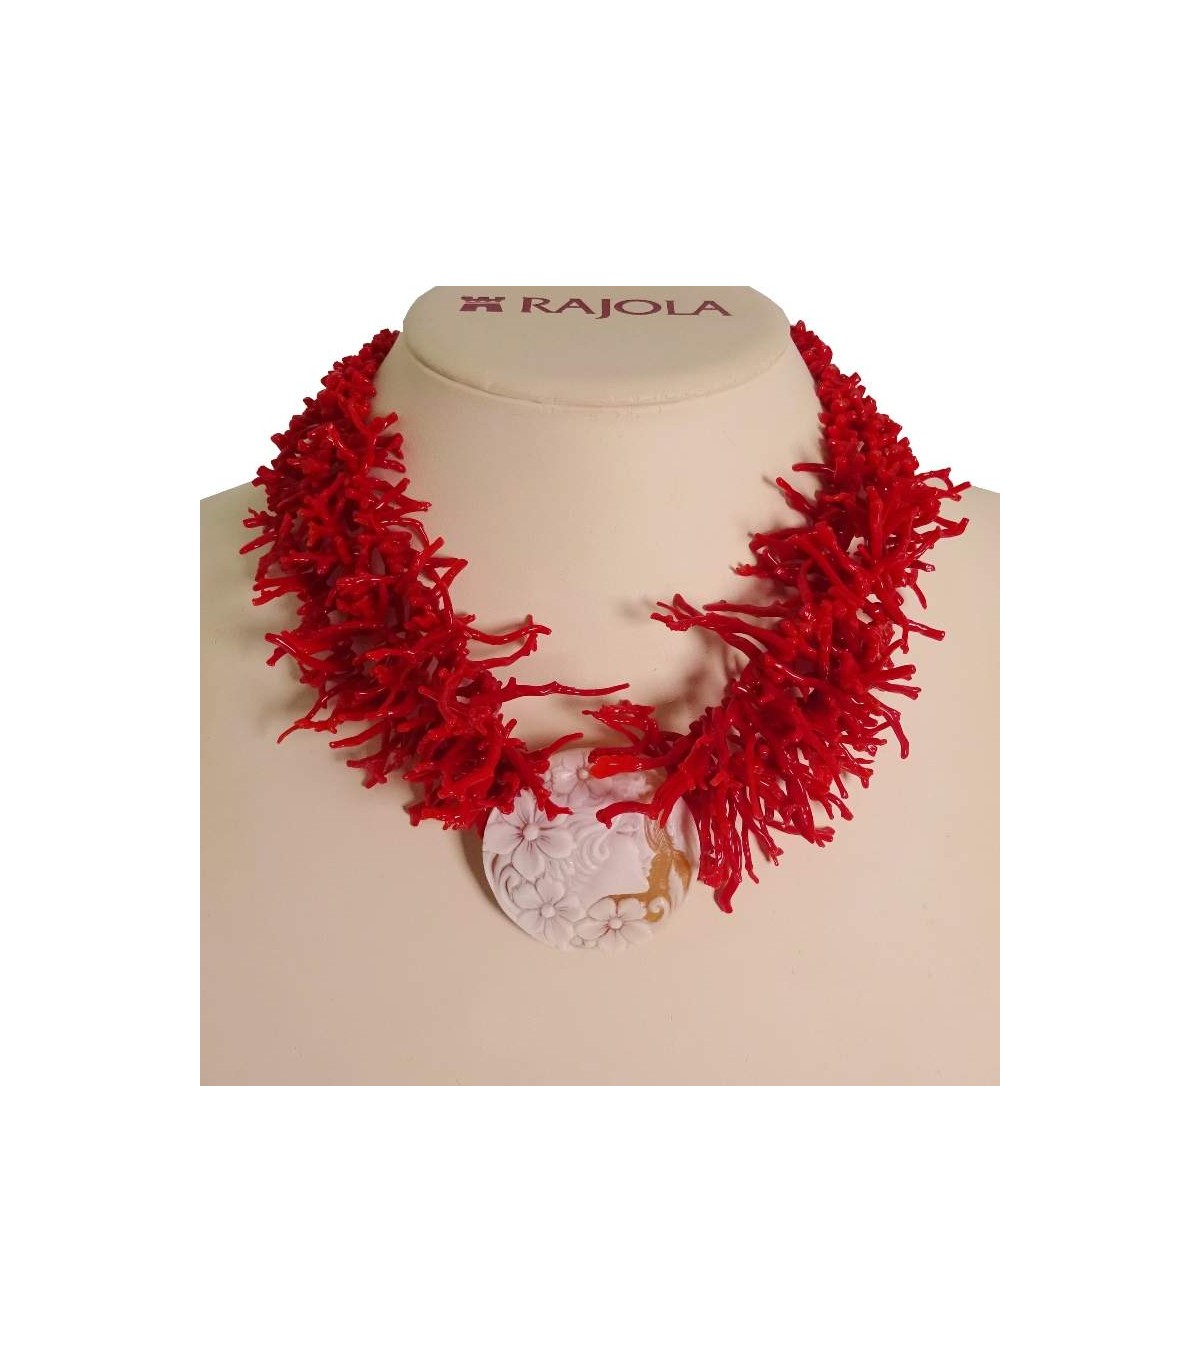 Rajola Necklace - Mermaids - Choker - Coral Fringes - Cameo-54430